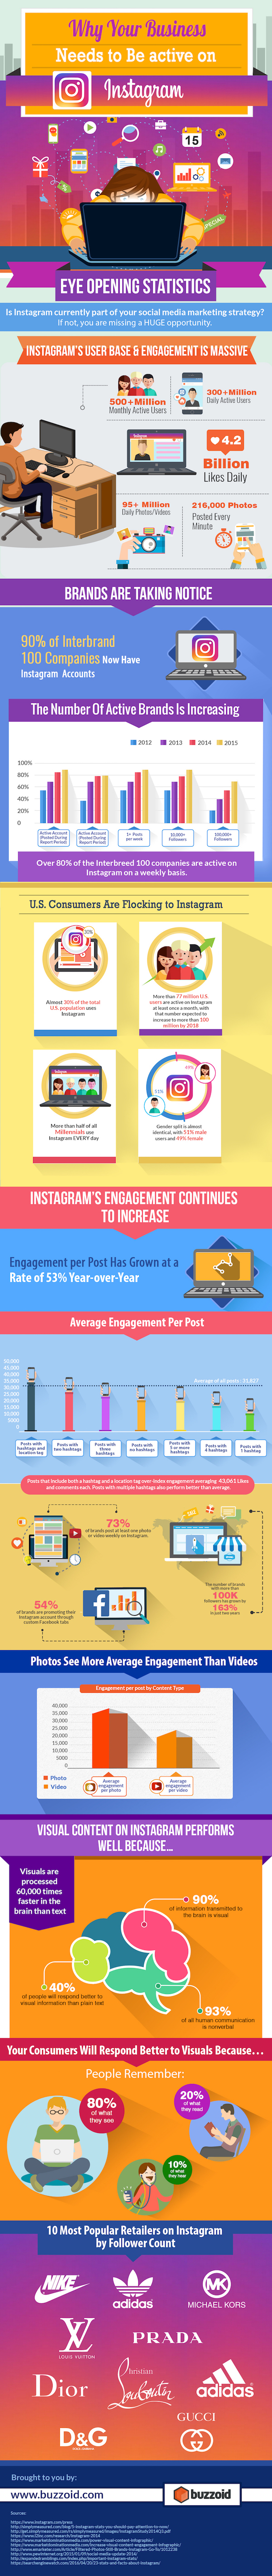 Instagram Marketing- It's Time Your Business Takes Action (Infographic)